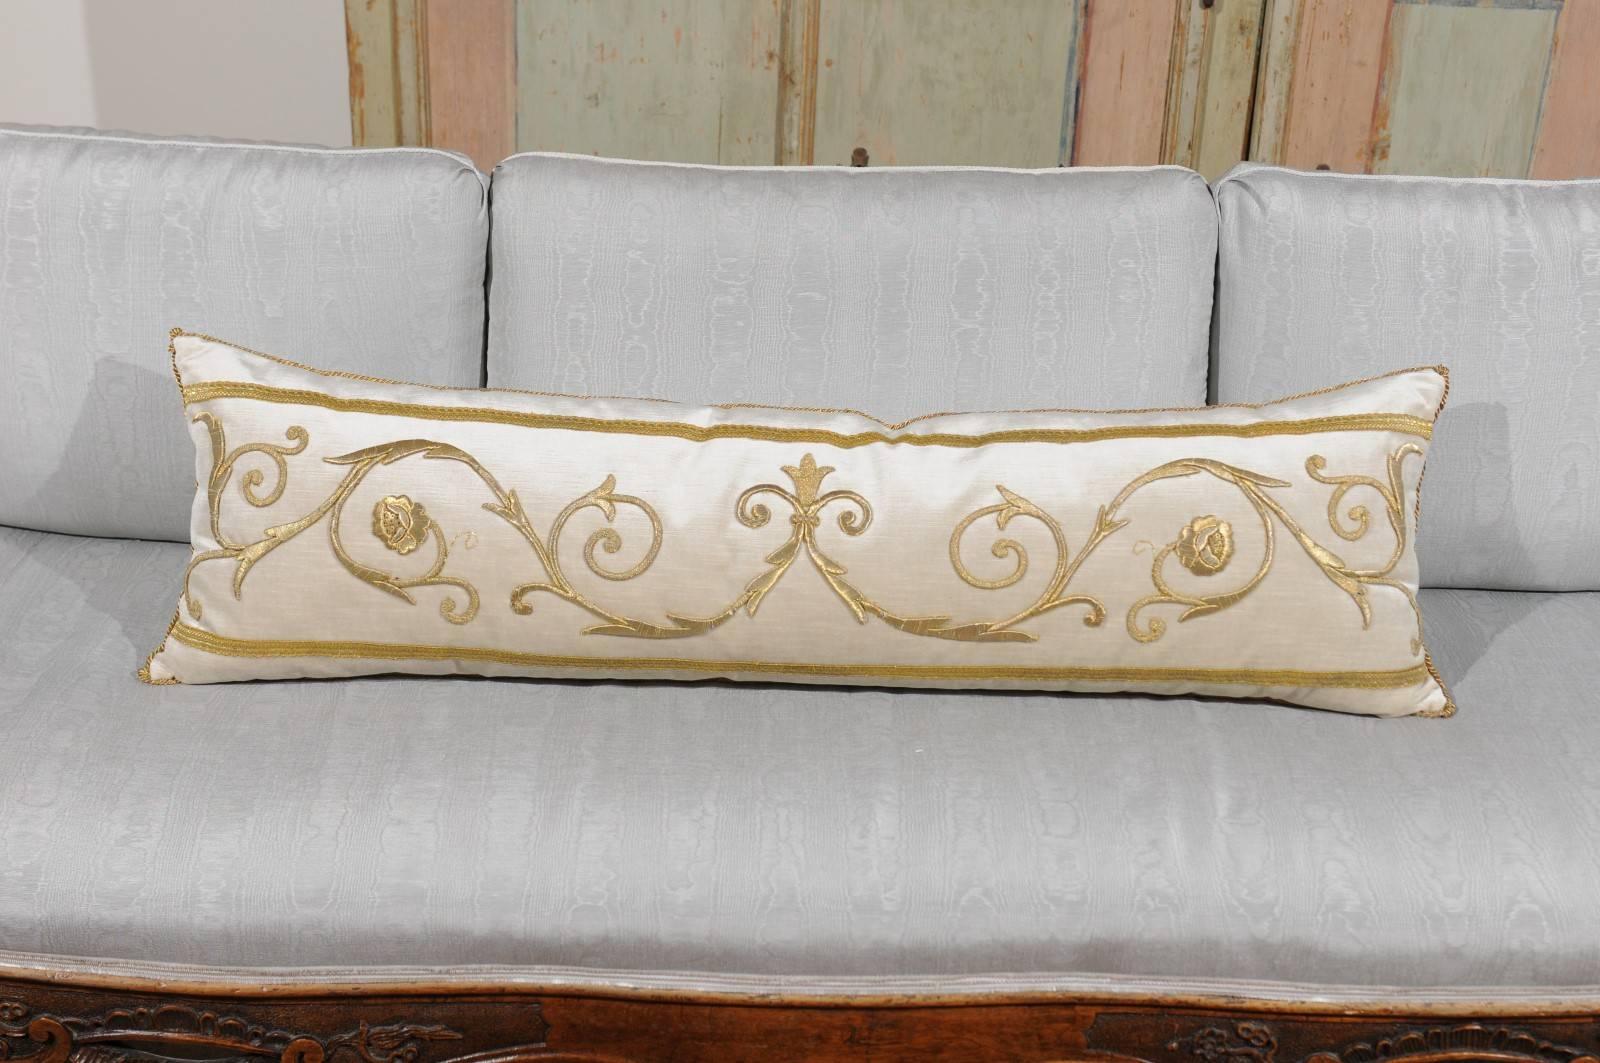 A lumbar cushion made of an antique European raised gold metallic embroidery of scrollwork bordered with antique gold metallic galon on oyster velvet. Featuring a graceful décor of Renaissance style rinceaux standing out beautifully on the subtle